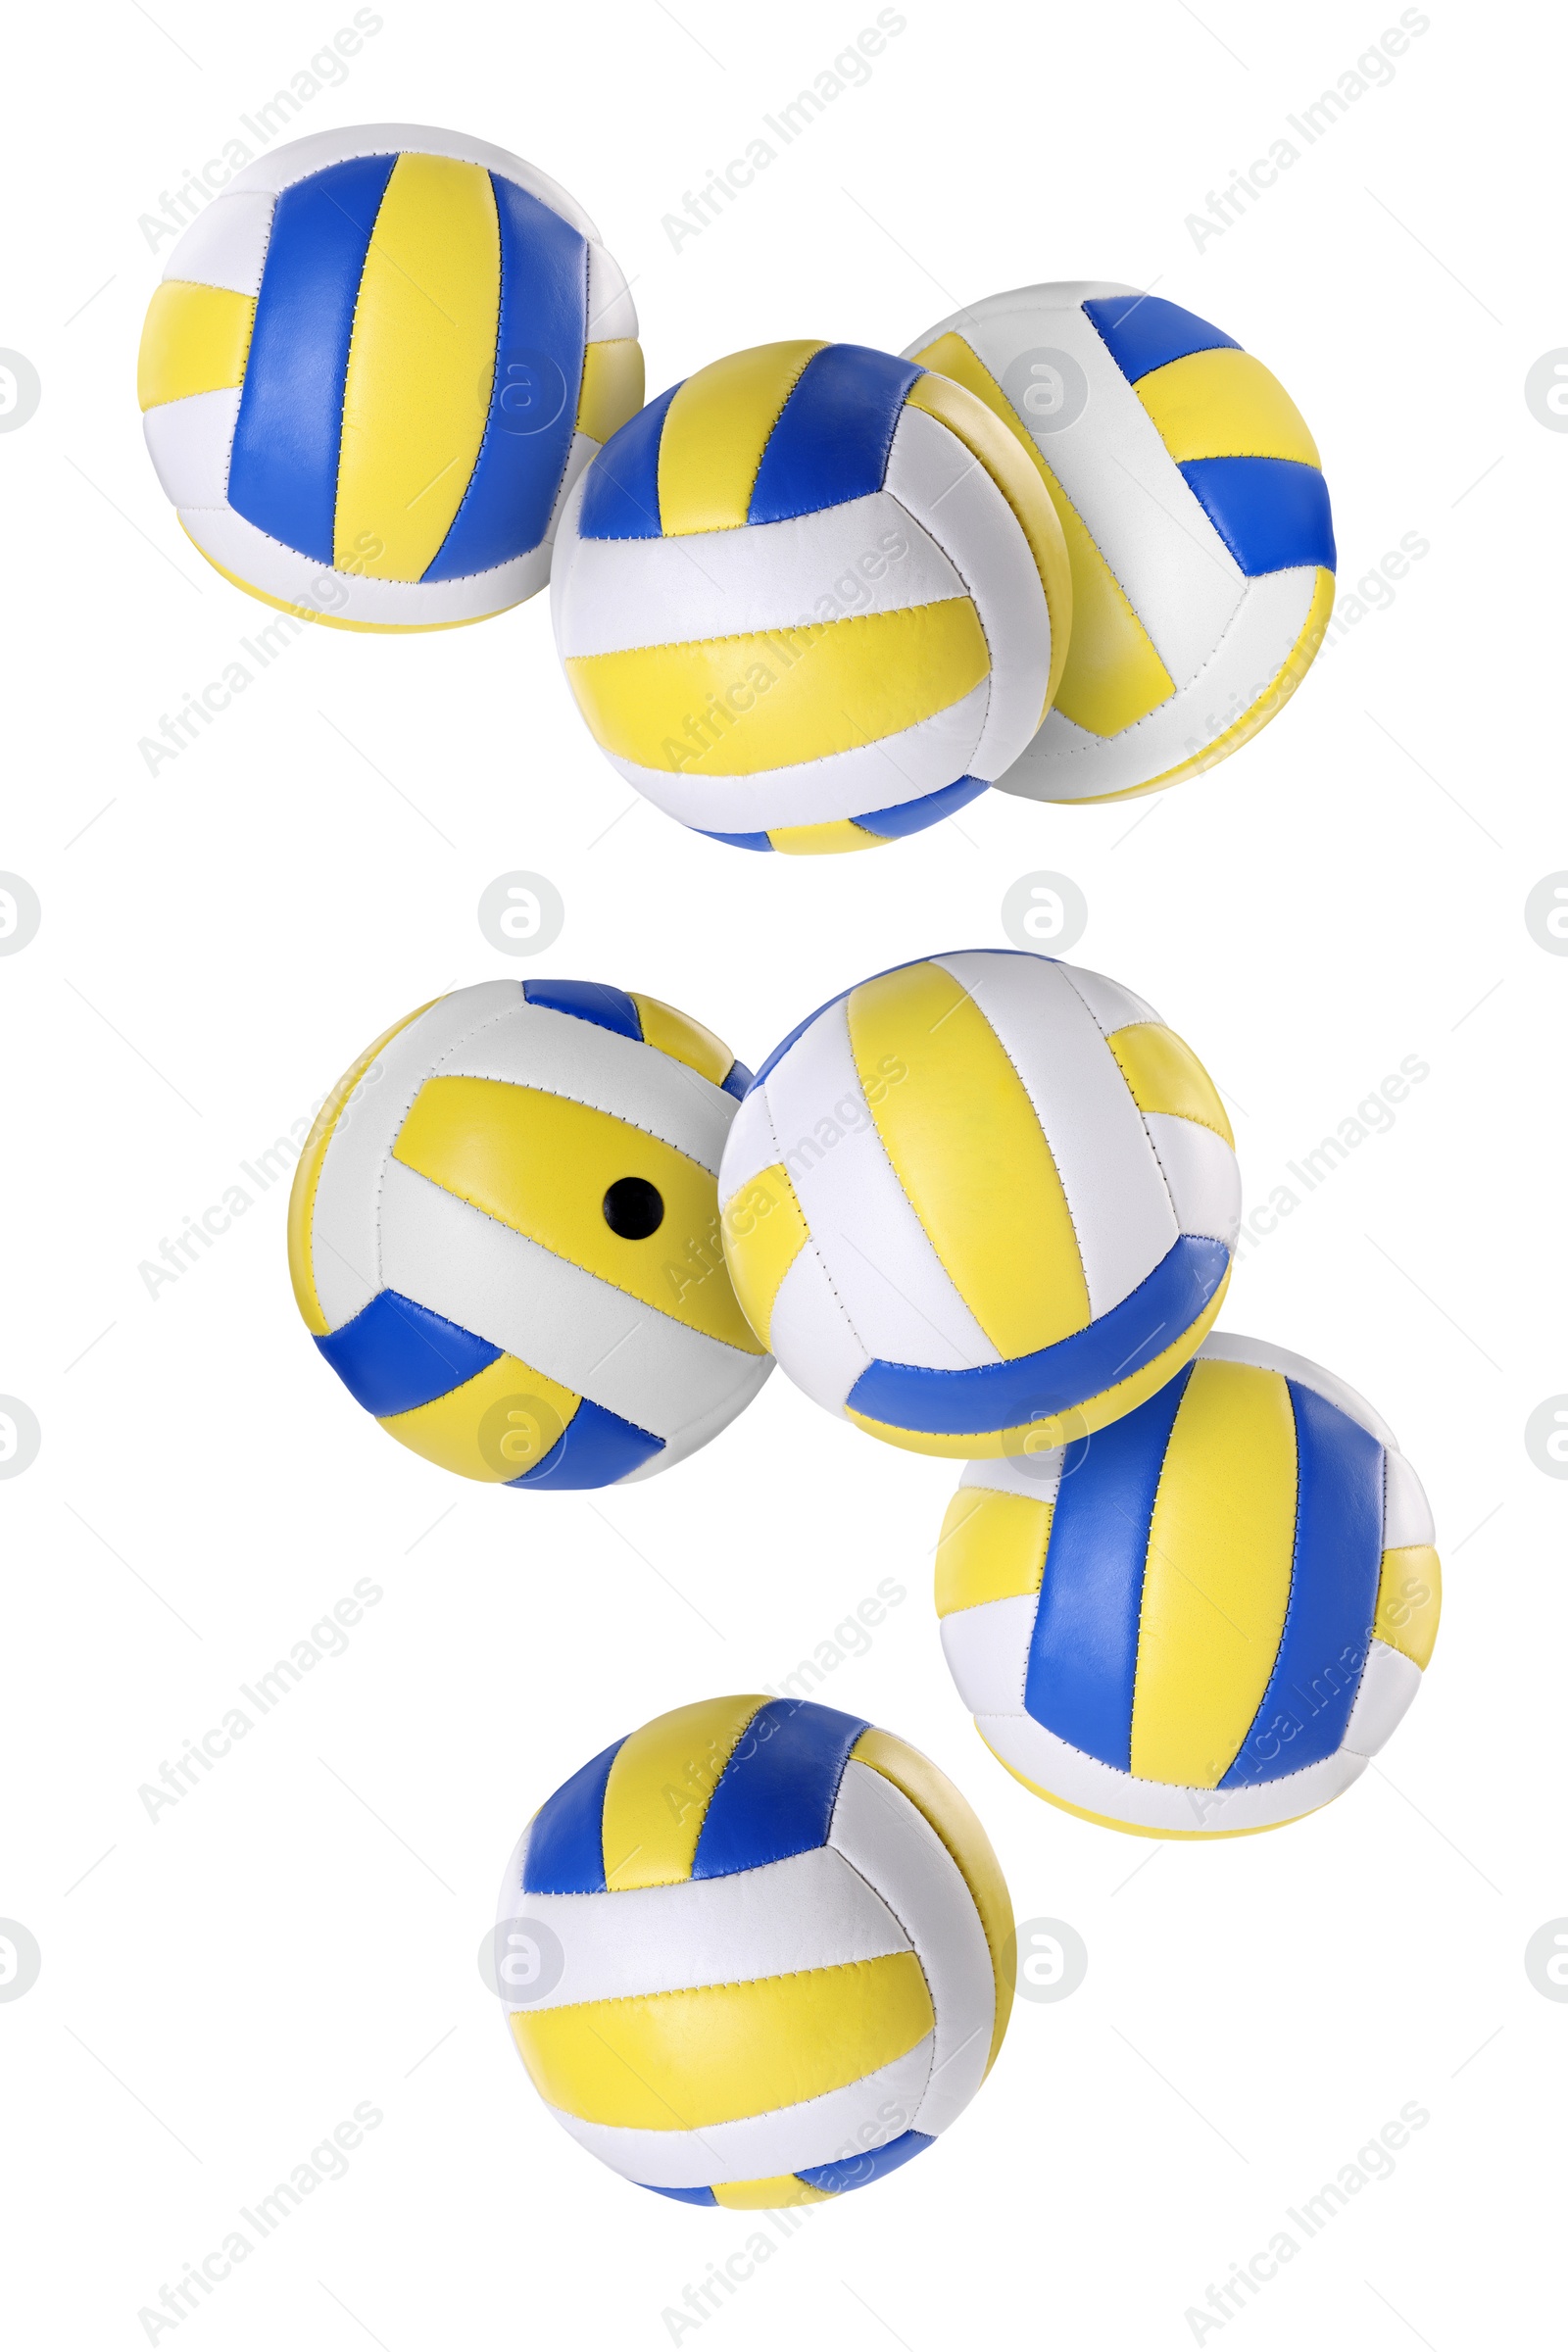 Image of Many volleyball balls flying on white background